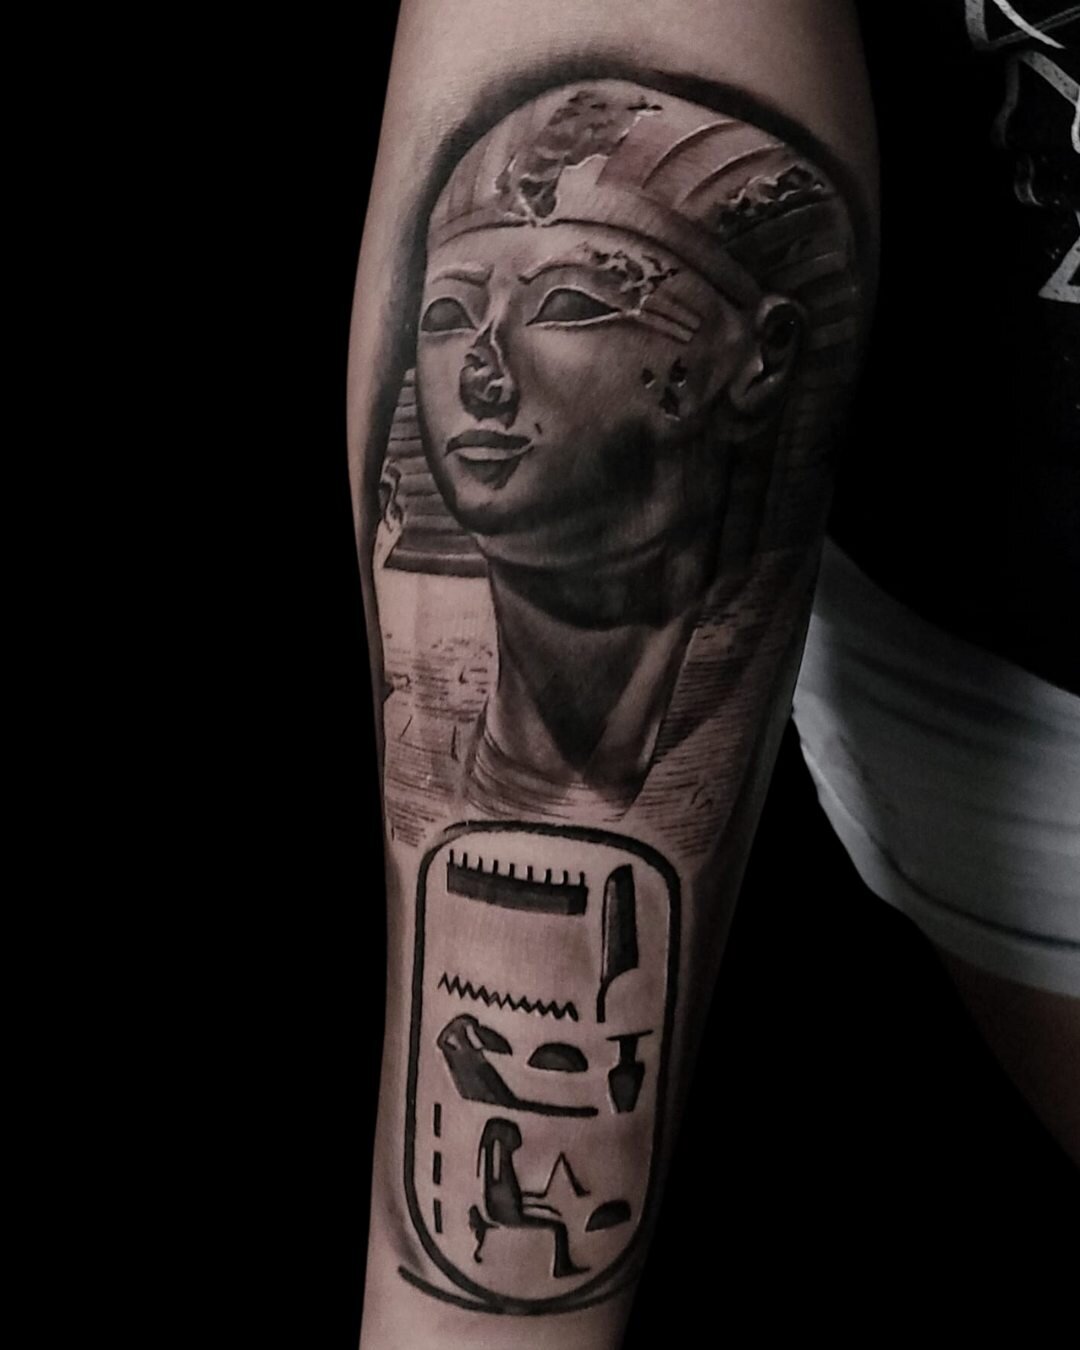 The first session of this ancient Egypt sleeve shows off @robertbeemantattoos' ability to create life-like details that add to a greater narrative 🖋

Robert patiently carved out the complex details using his mastery of black and gray realism techniq